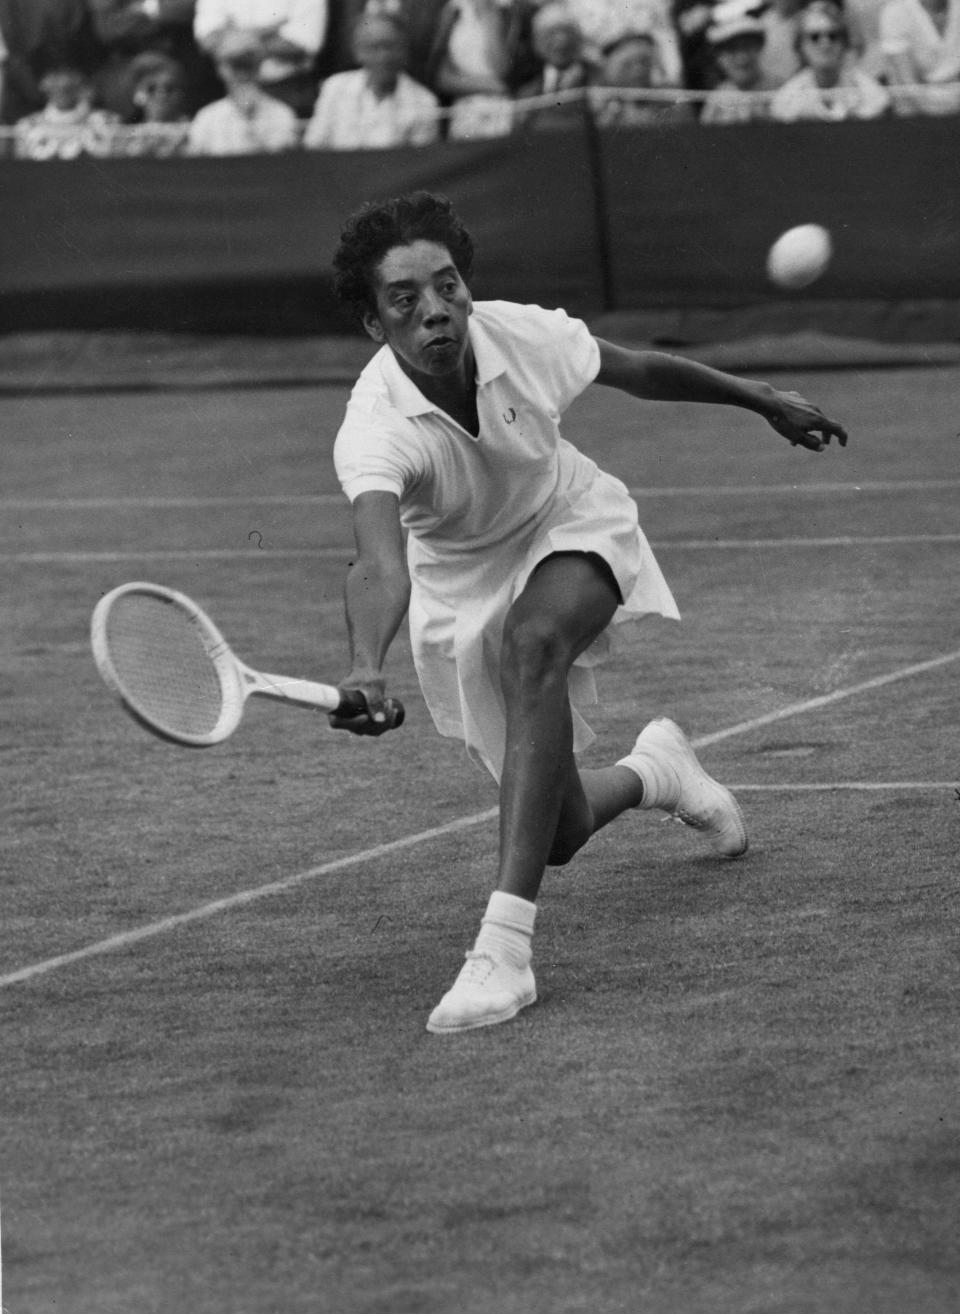 American tennis player Althea Gibson in action at the Wimbledon Lawn Tennis Championships.